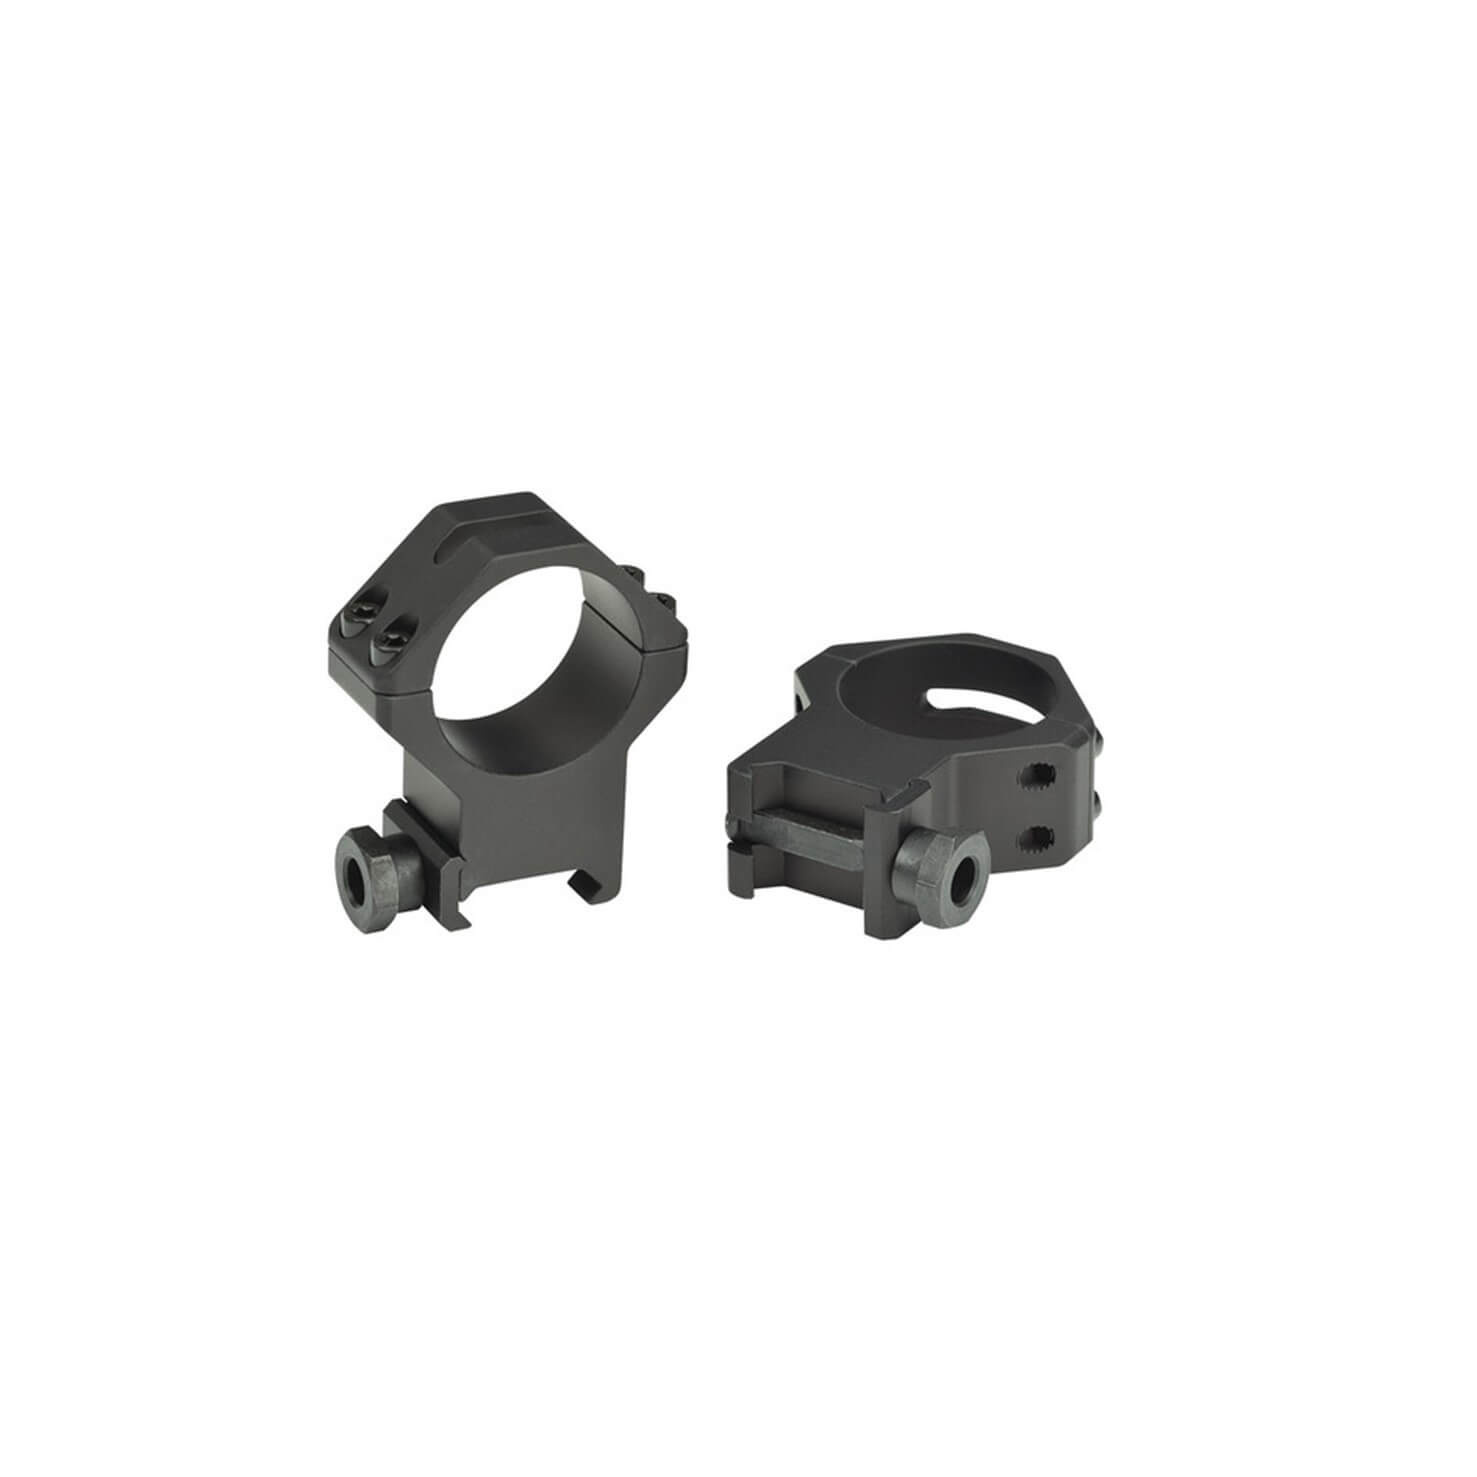 Weaver 4-Hole Tactical 30mm Picatinny Mounting Rings, Matte